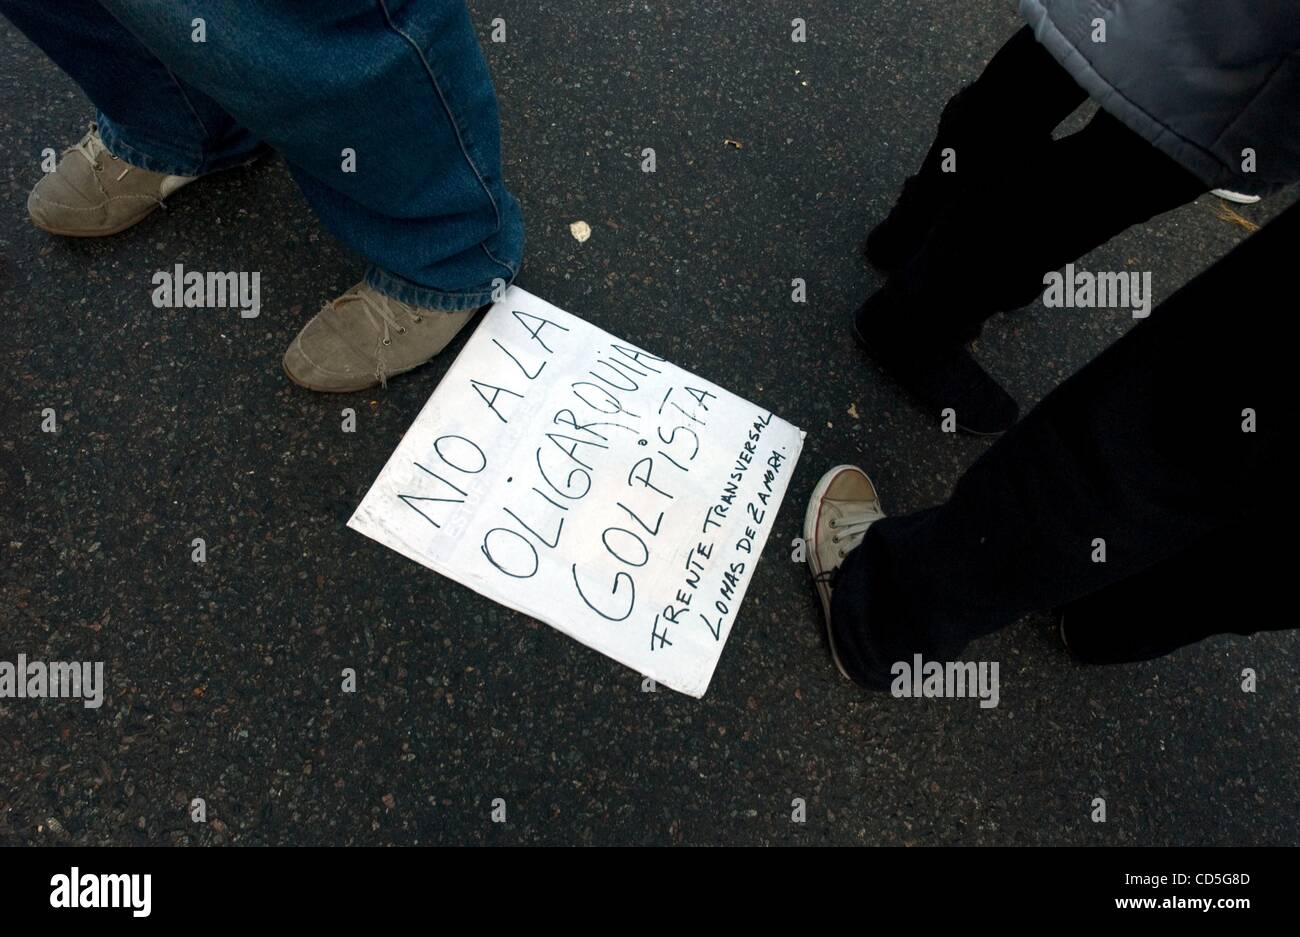 Jun 18, 2008 - Buenos Aires, Argentina - A pro-government sign, which reads, 'no to the oligarchy coup,' in reference to the large agricultural groups embroiled in a conflict with the national government, are discarded among the crowd as pro-government supporters flood the Plaza de Mayo during a ral Stock Photo